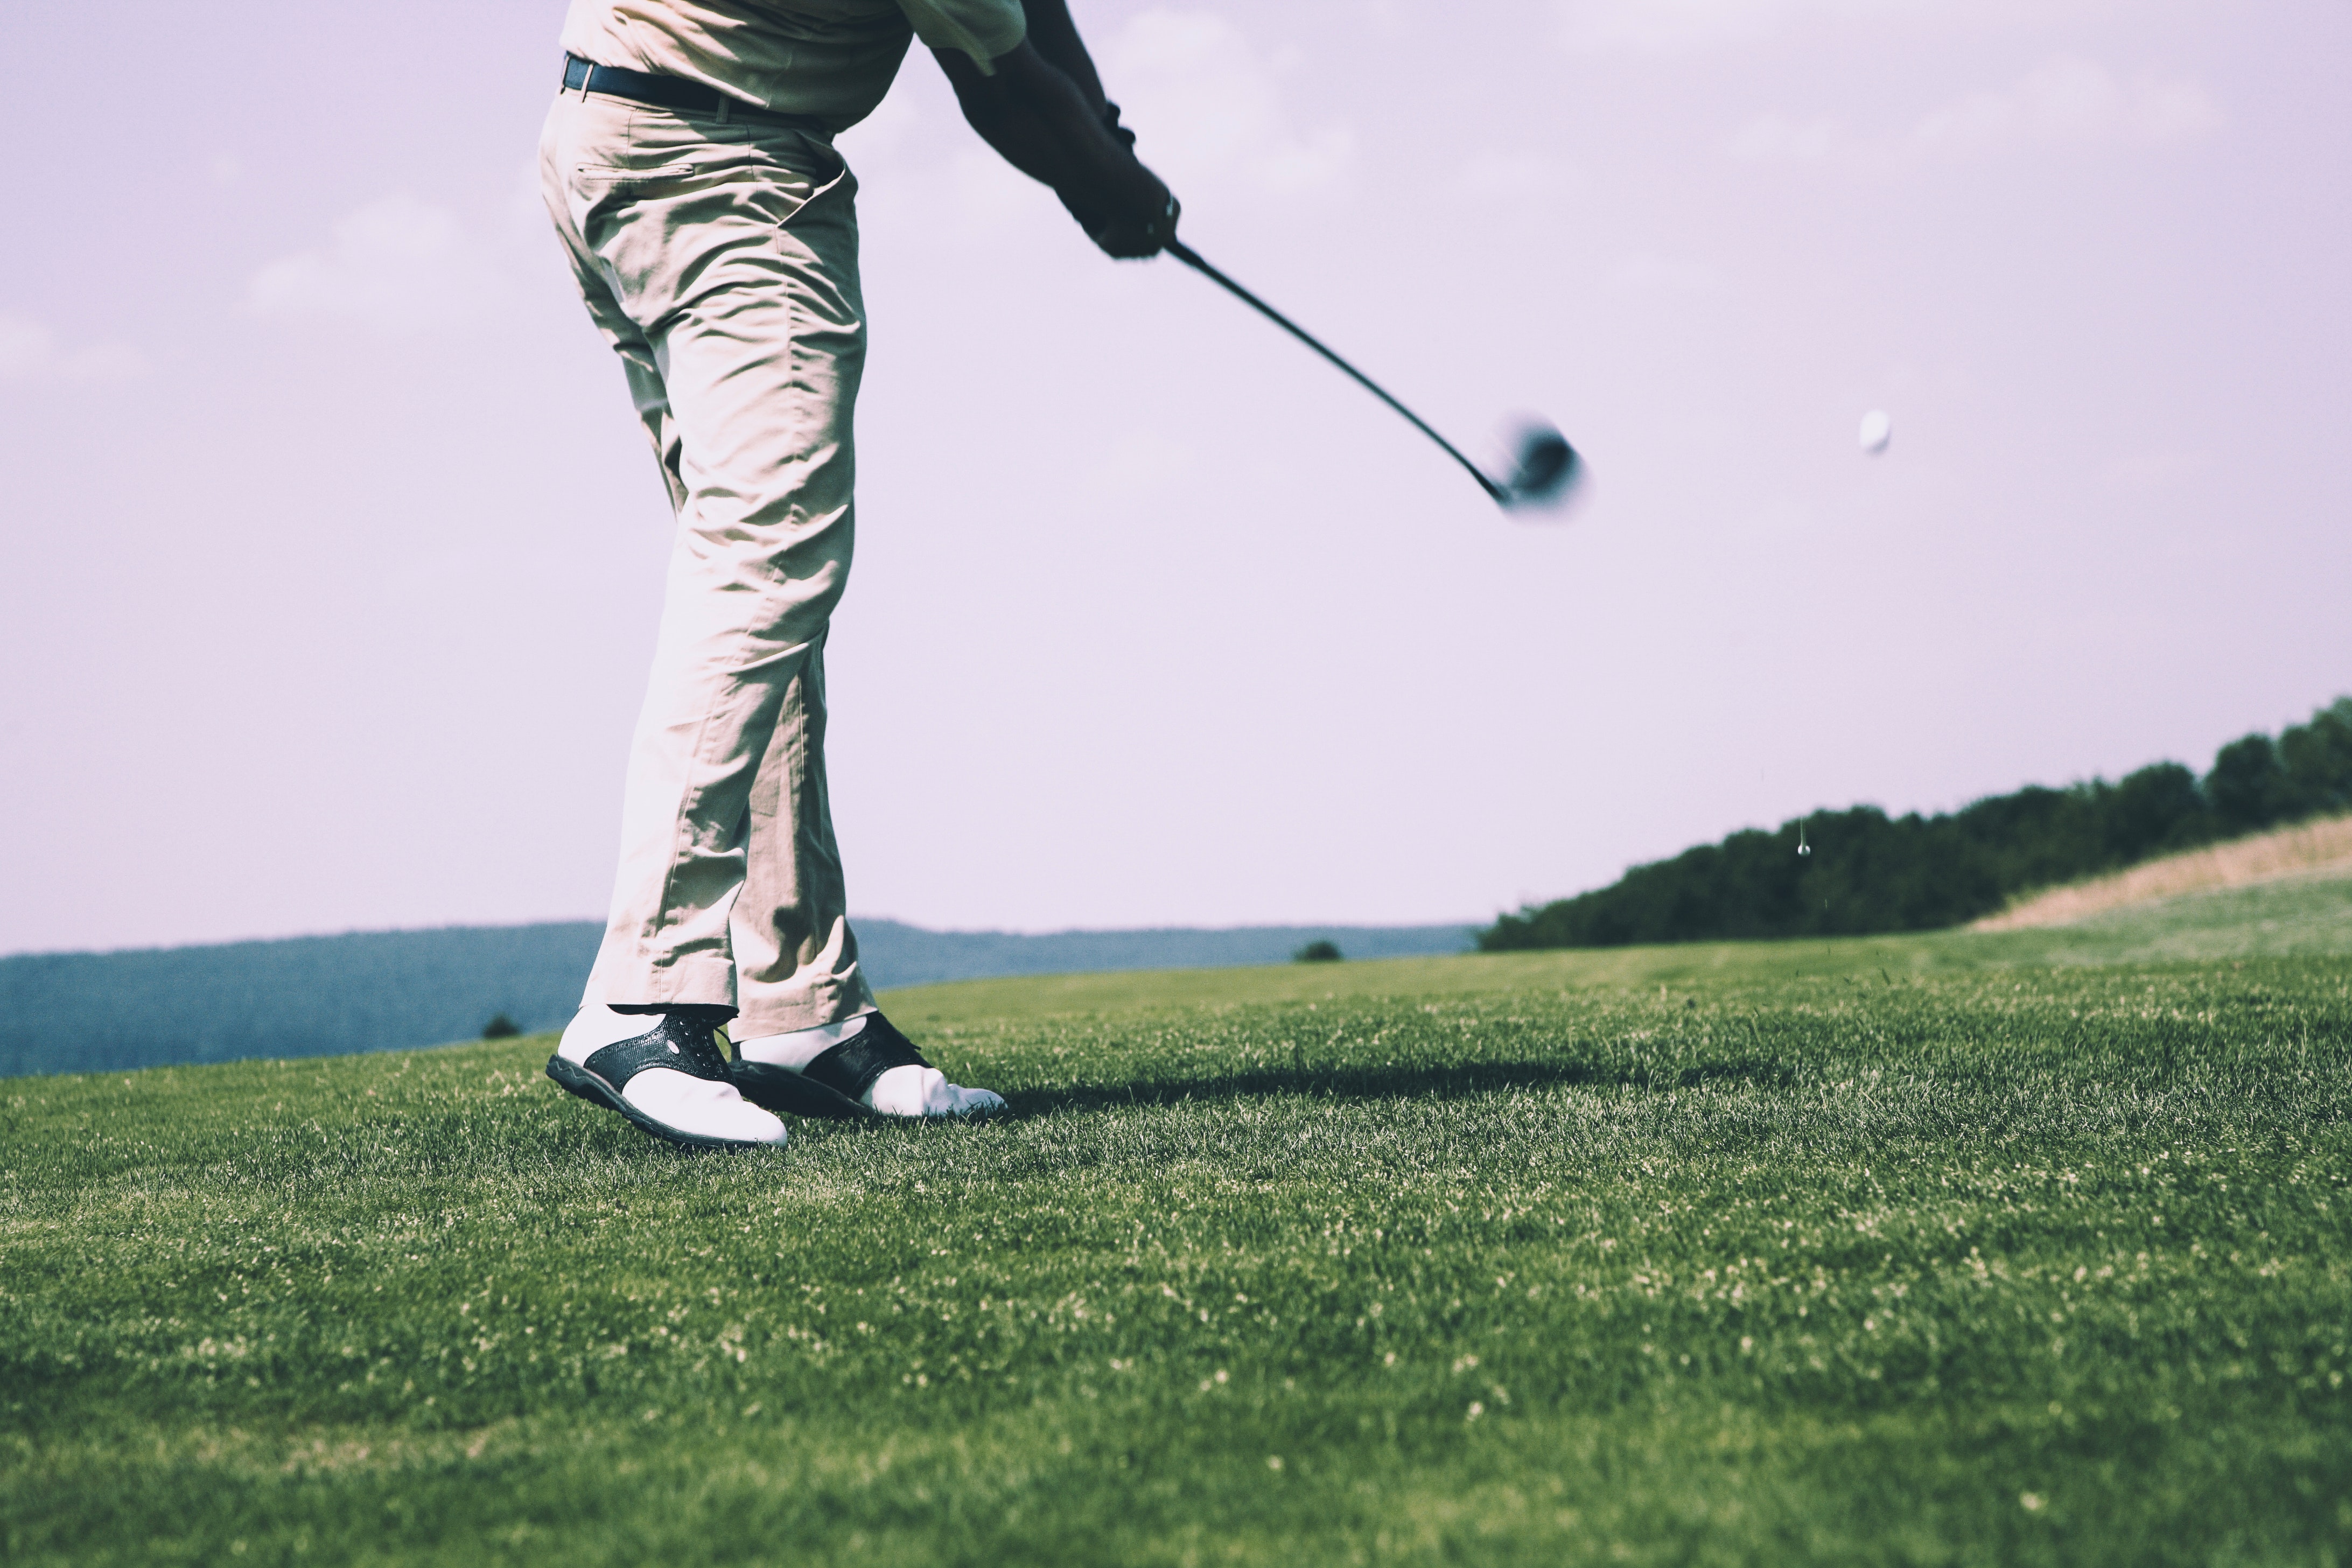 Man in white denim pants and black sandals playing golf during daytime photo